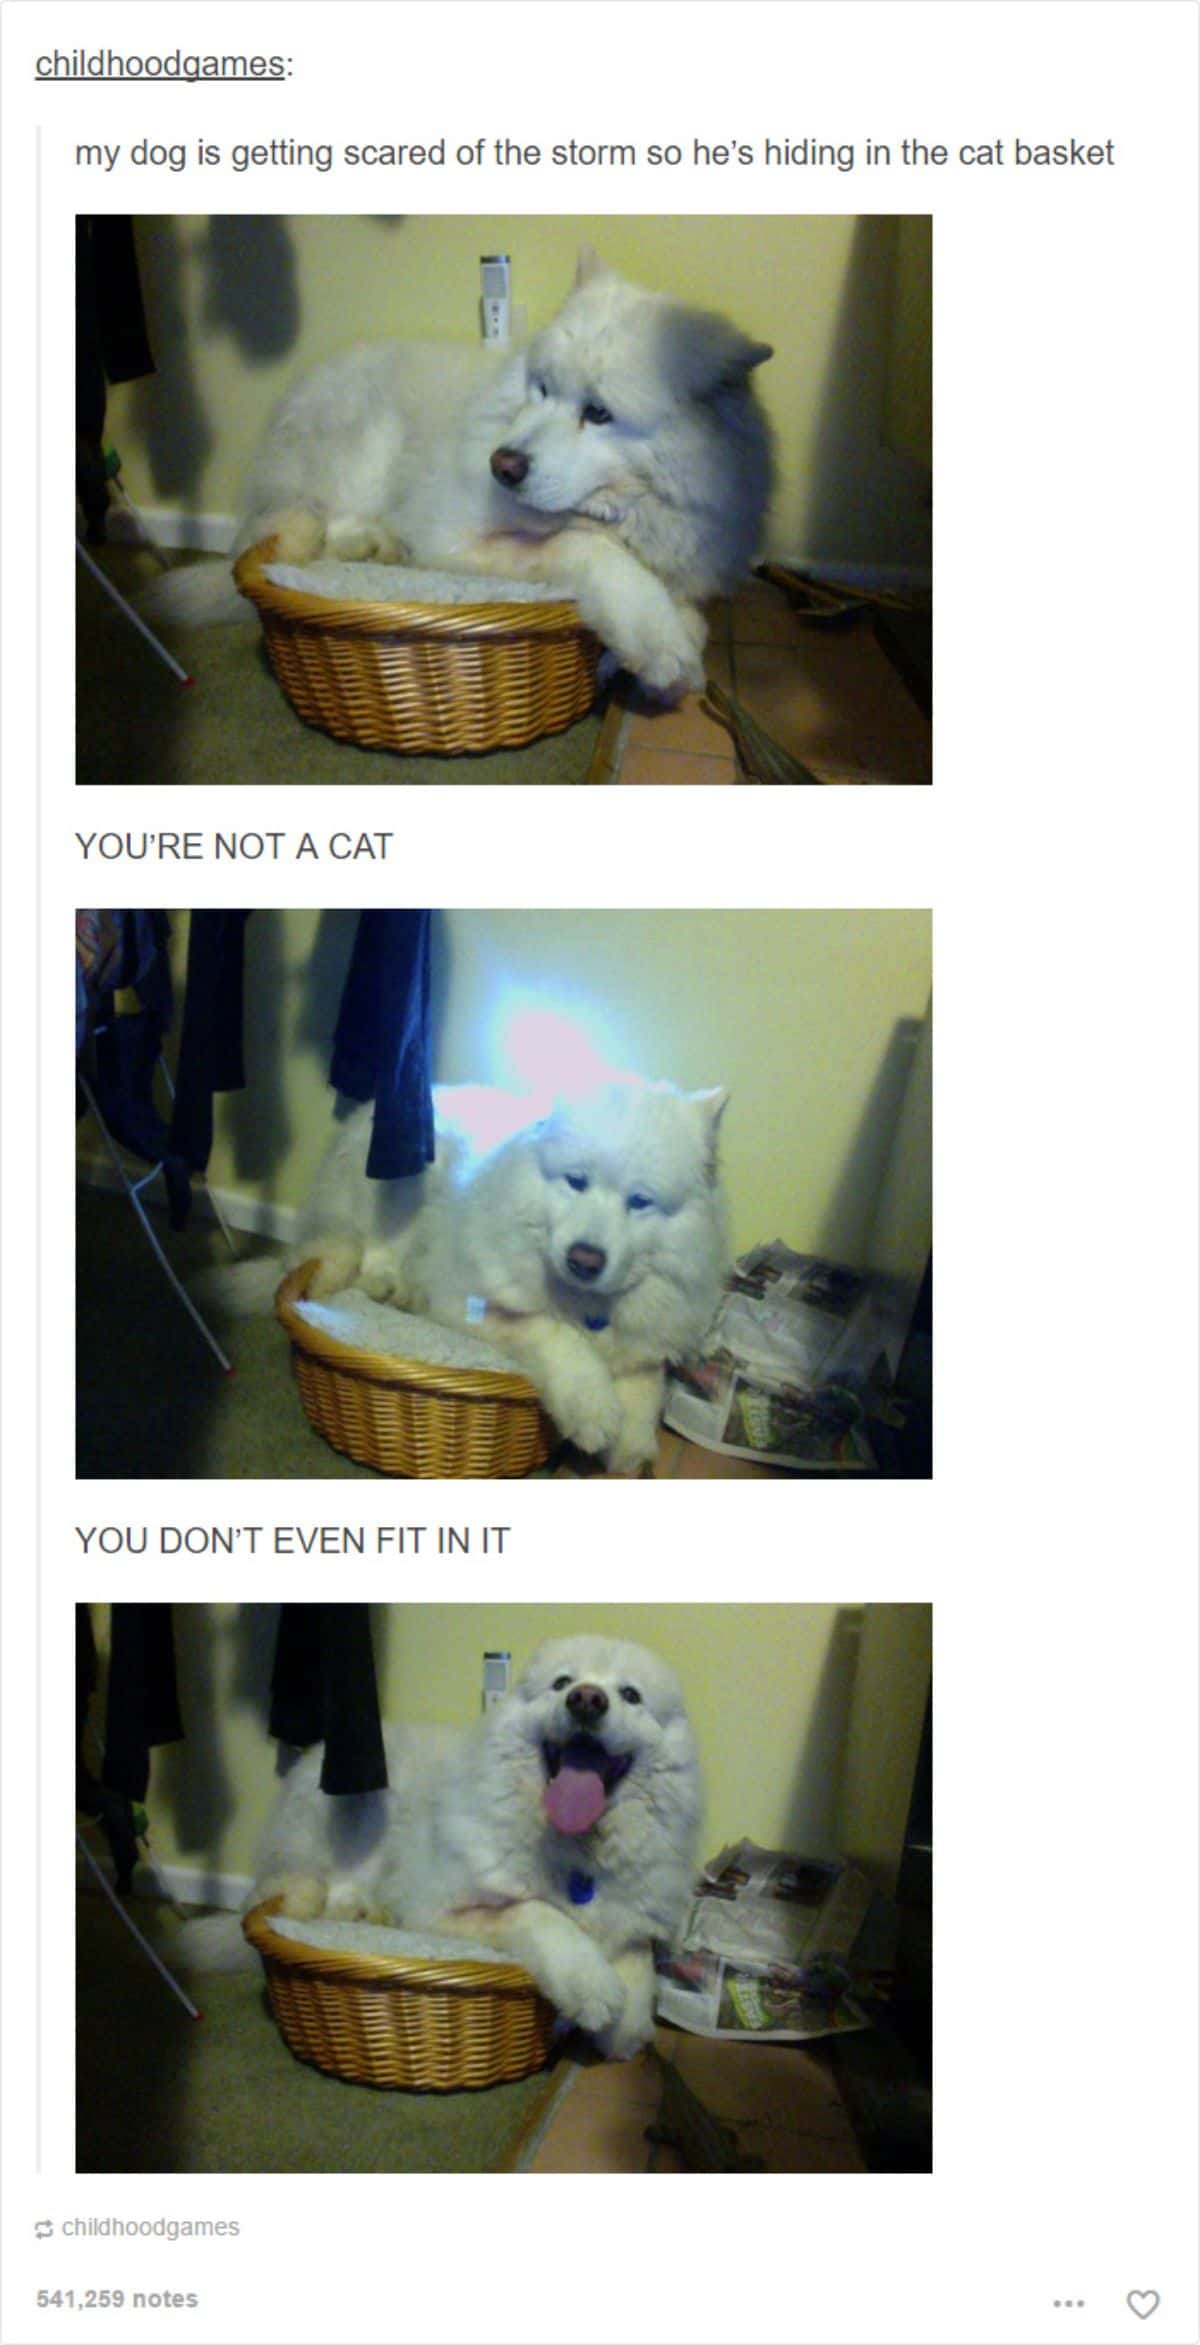 3 photos of a fluffy white dog laying on a cat basket that is too small for it